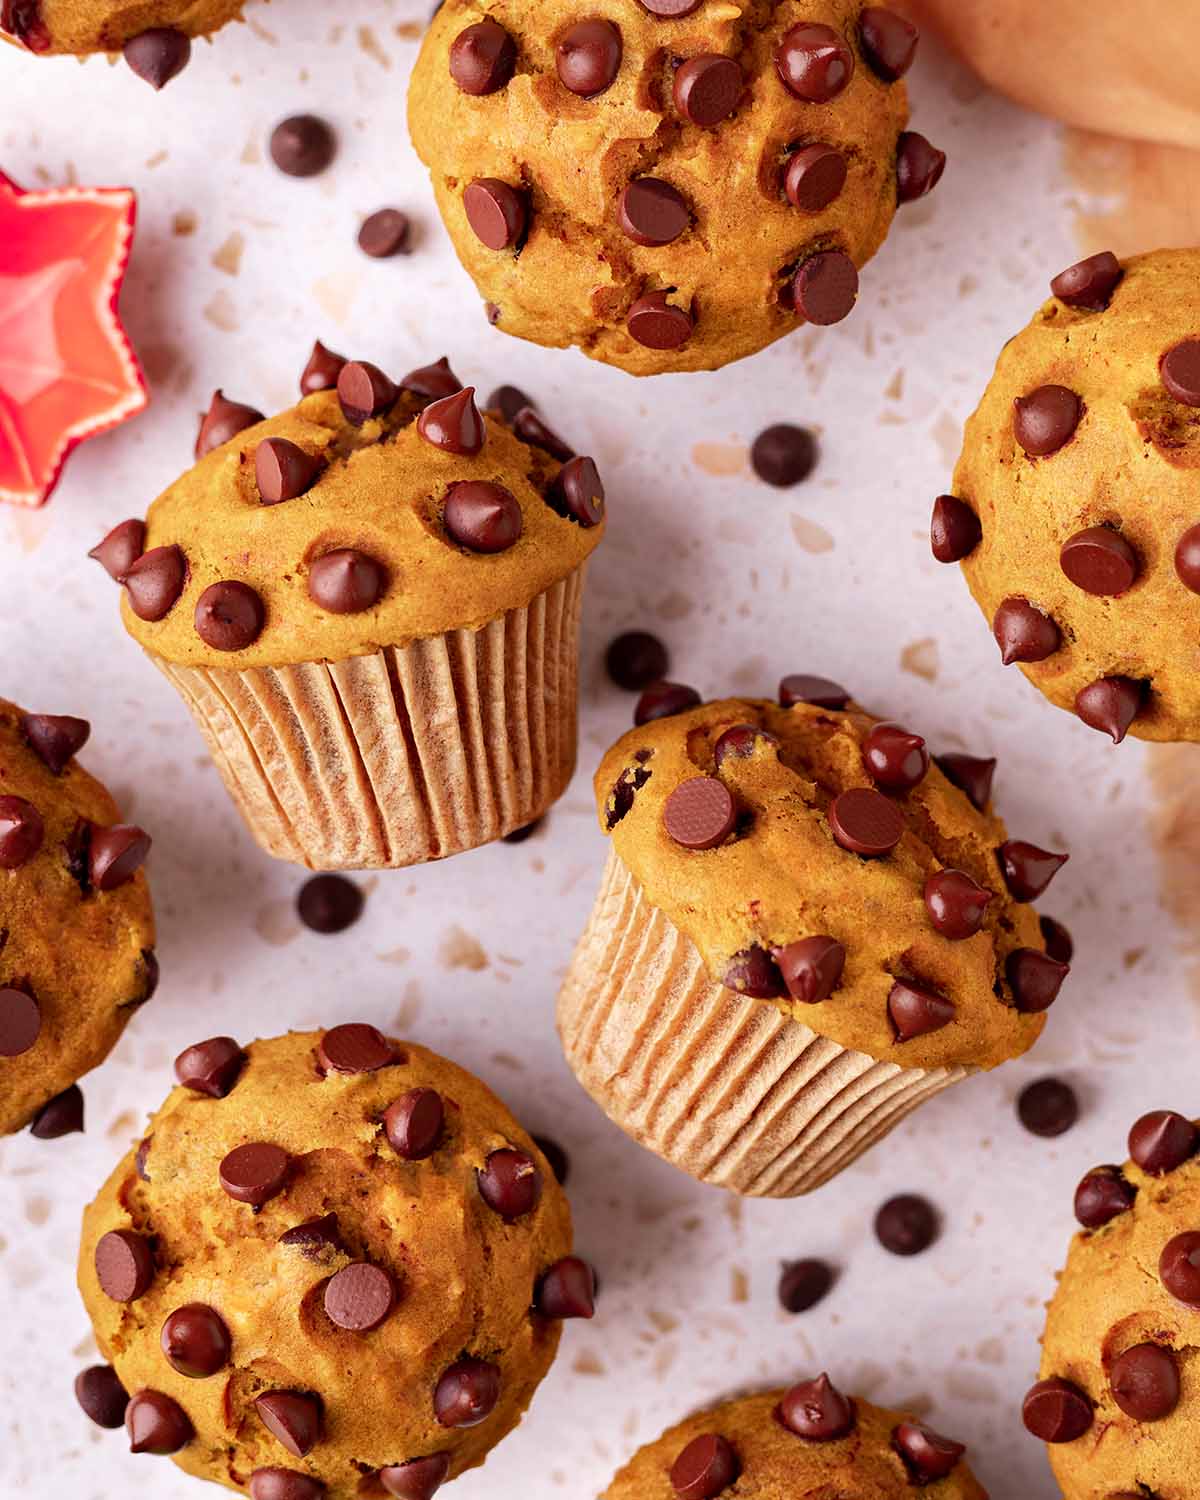 Overhead image of pumpkin muffins, with two muffins on their side showing the tall muffin tops.